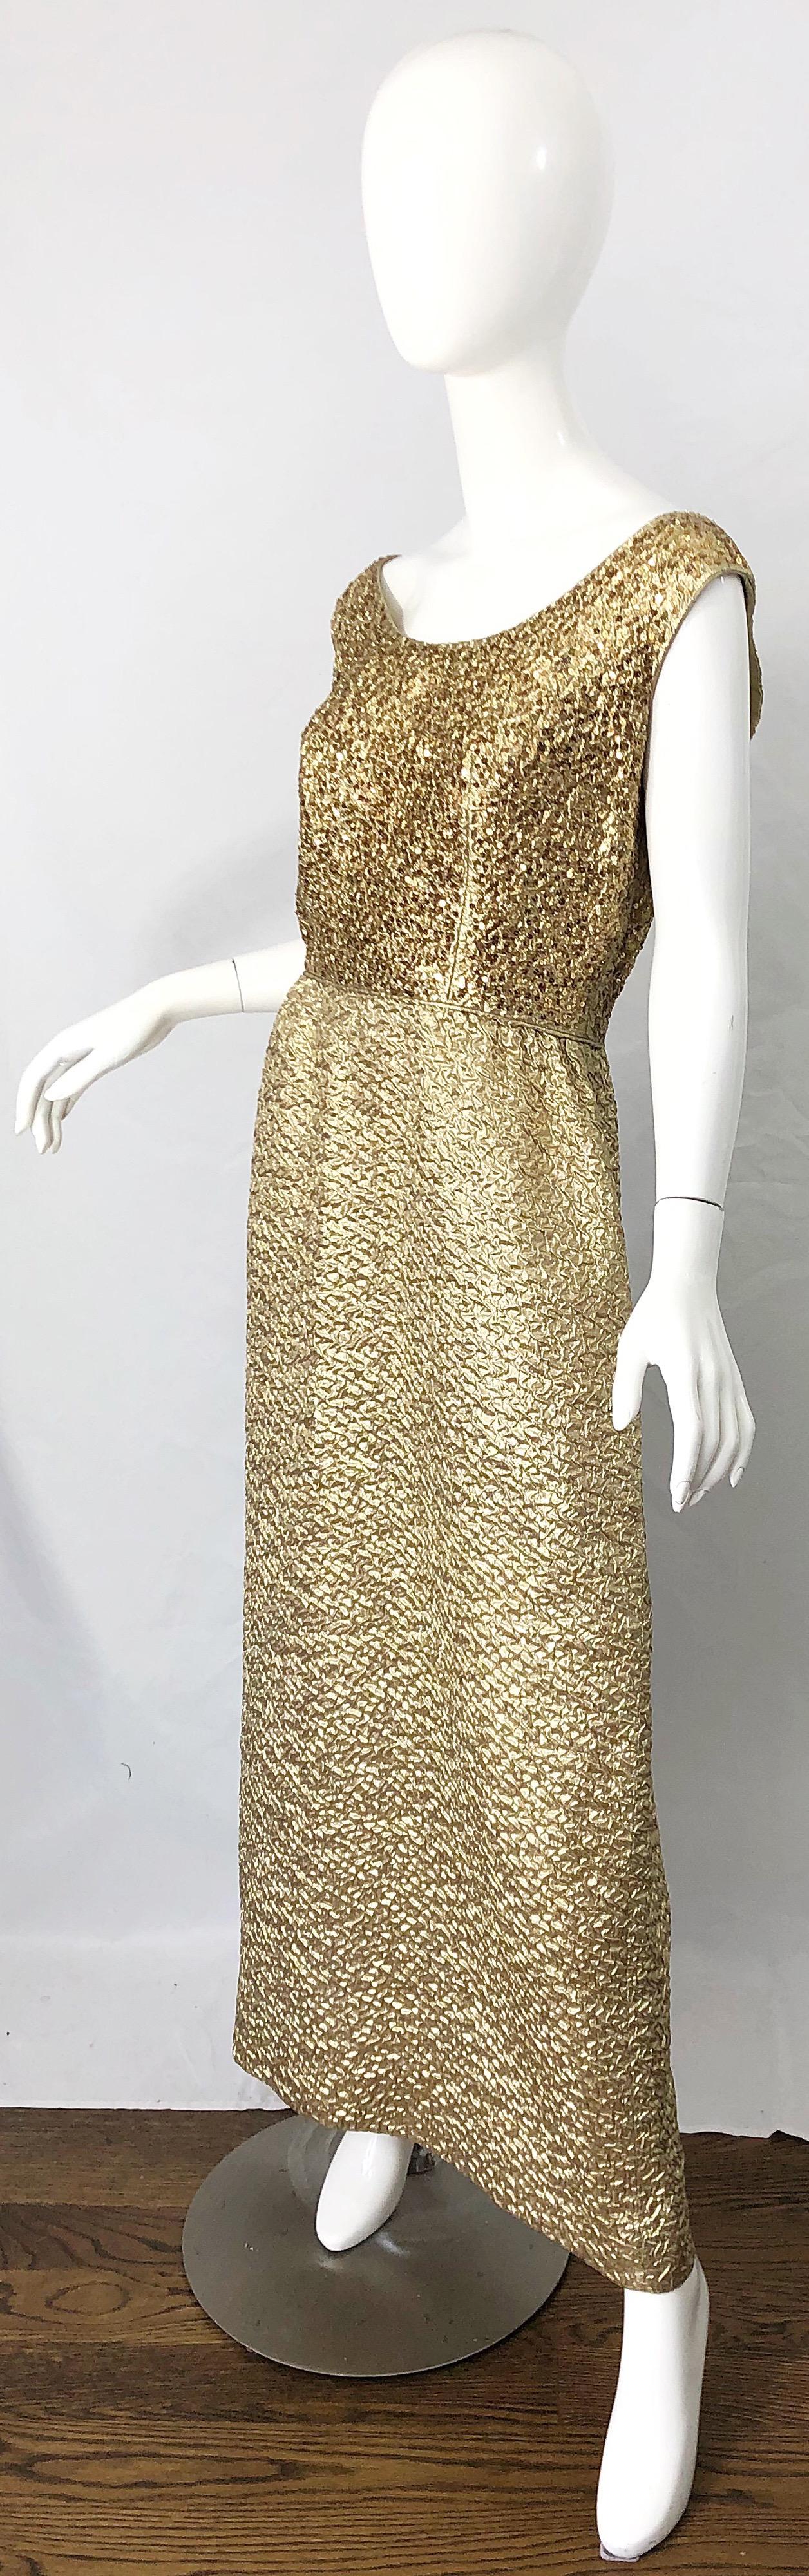 1960s Nat Kaplan Gold Sequin Rhinestone Encrusted Vintage 60s Evening Gown Dress In Excellent Condition For Sale In San Diego, CA